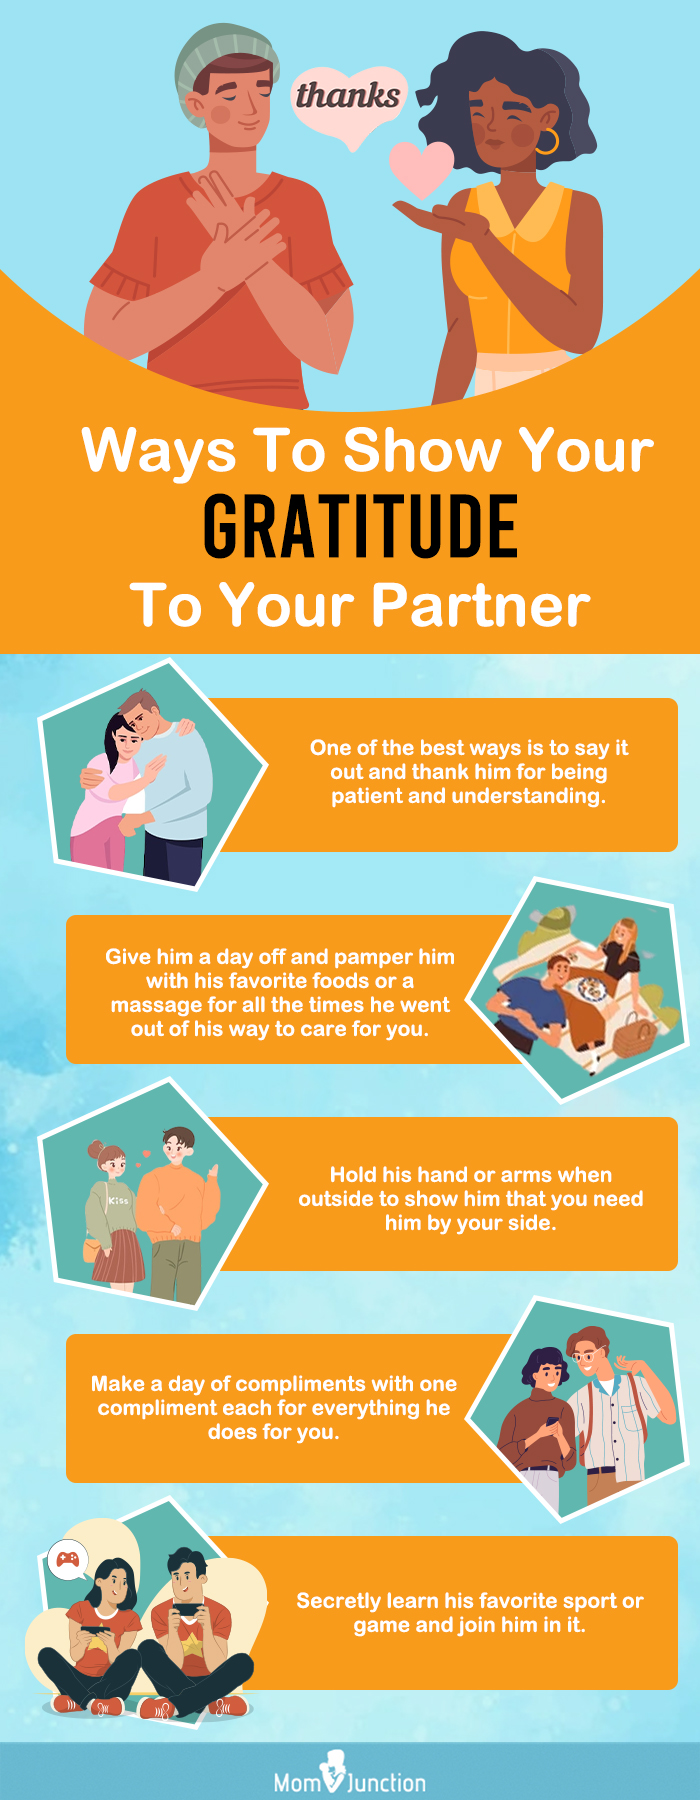 ways to show your gratitude to your partner (infographic)